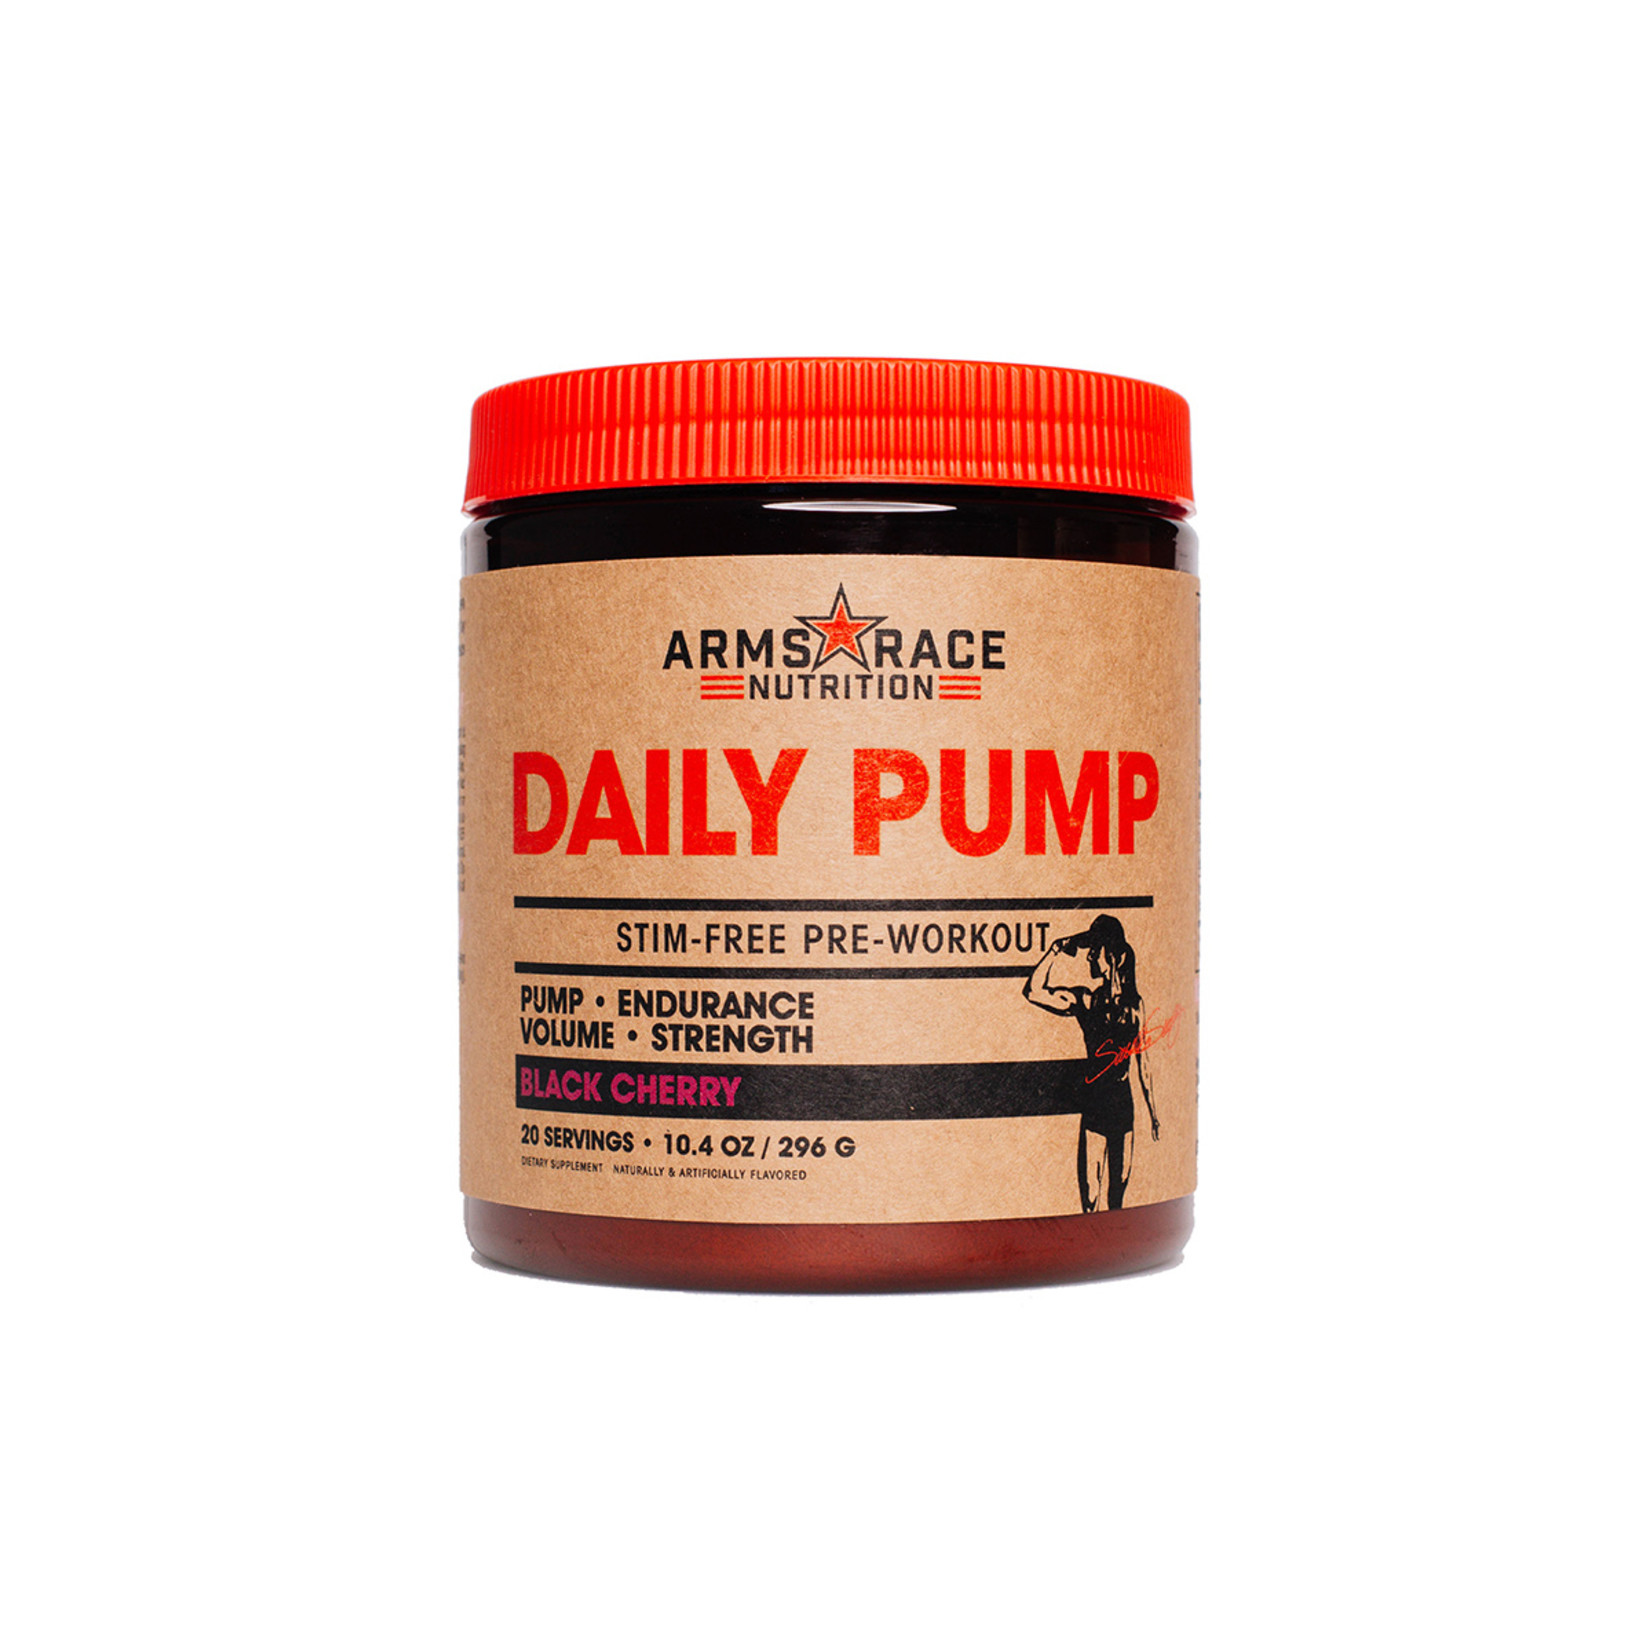 Arms Race Nutrition Daily Pump